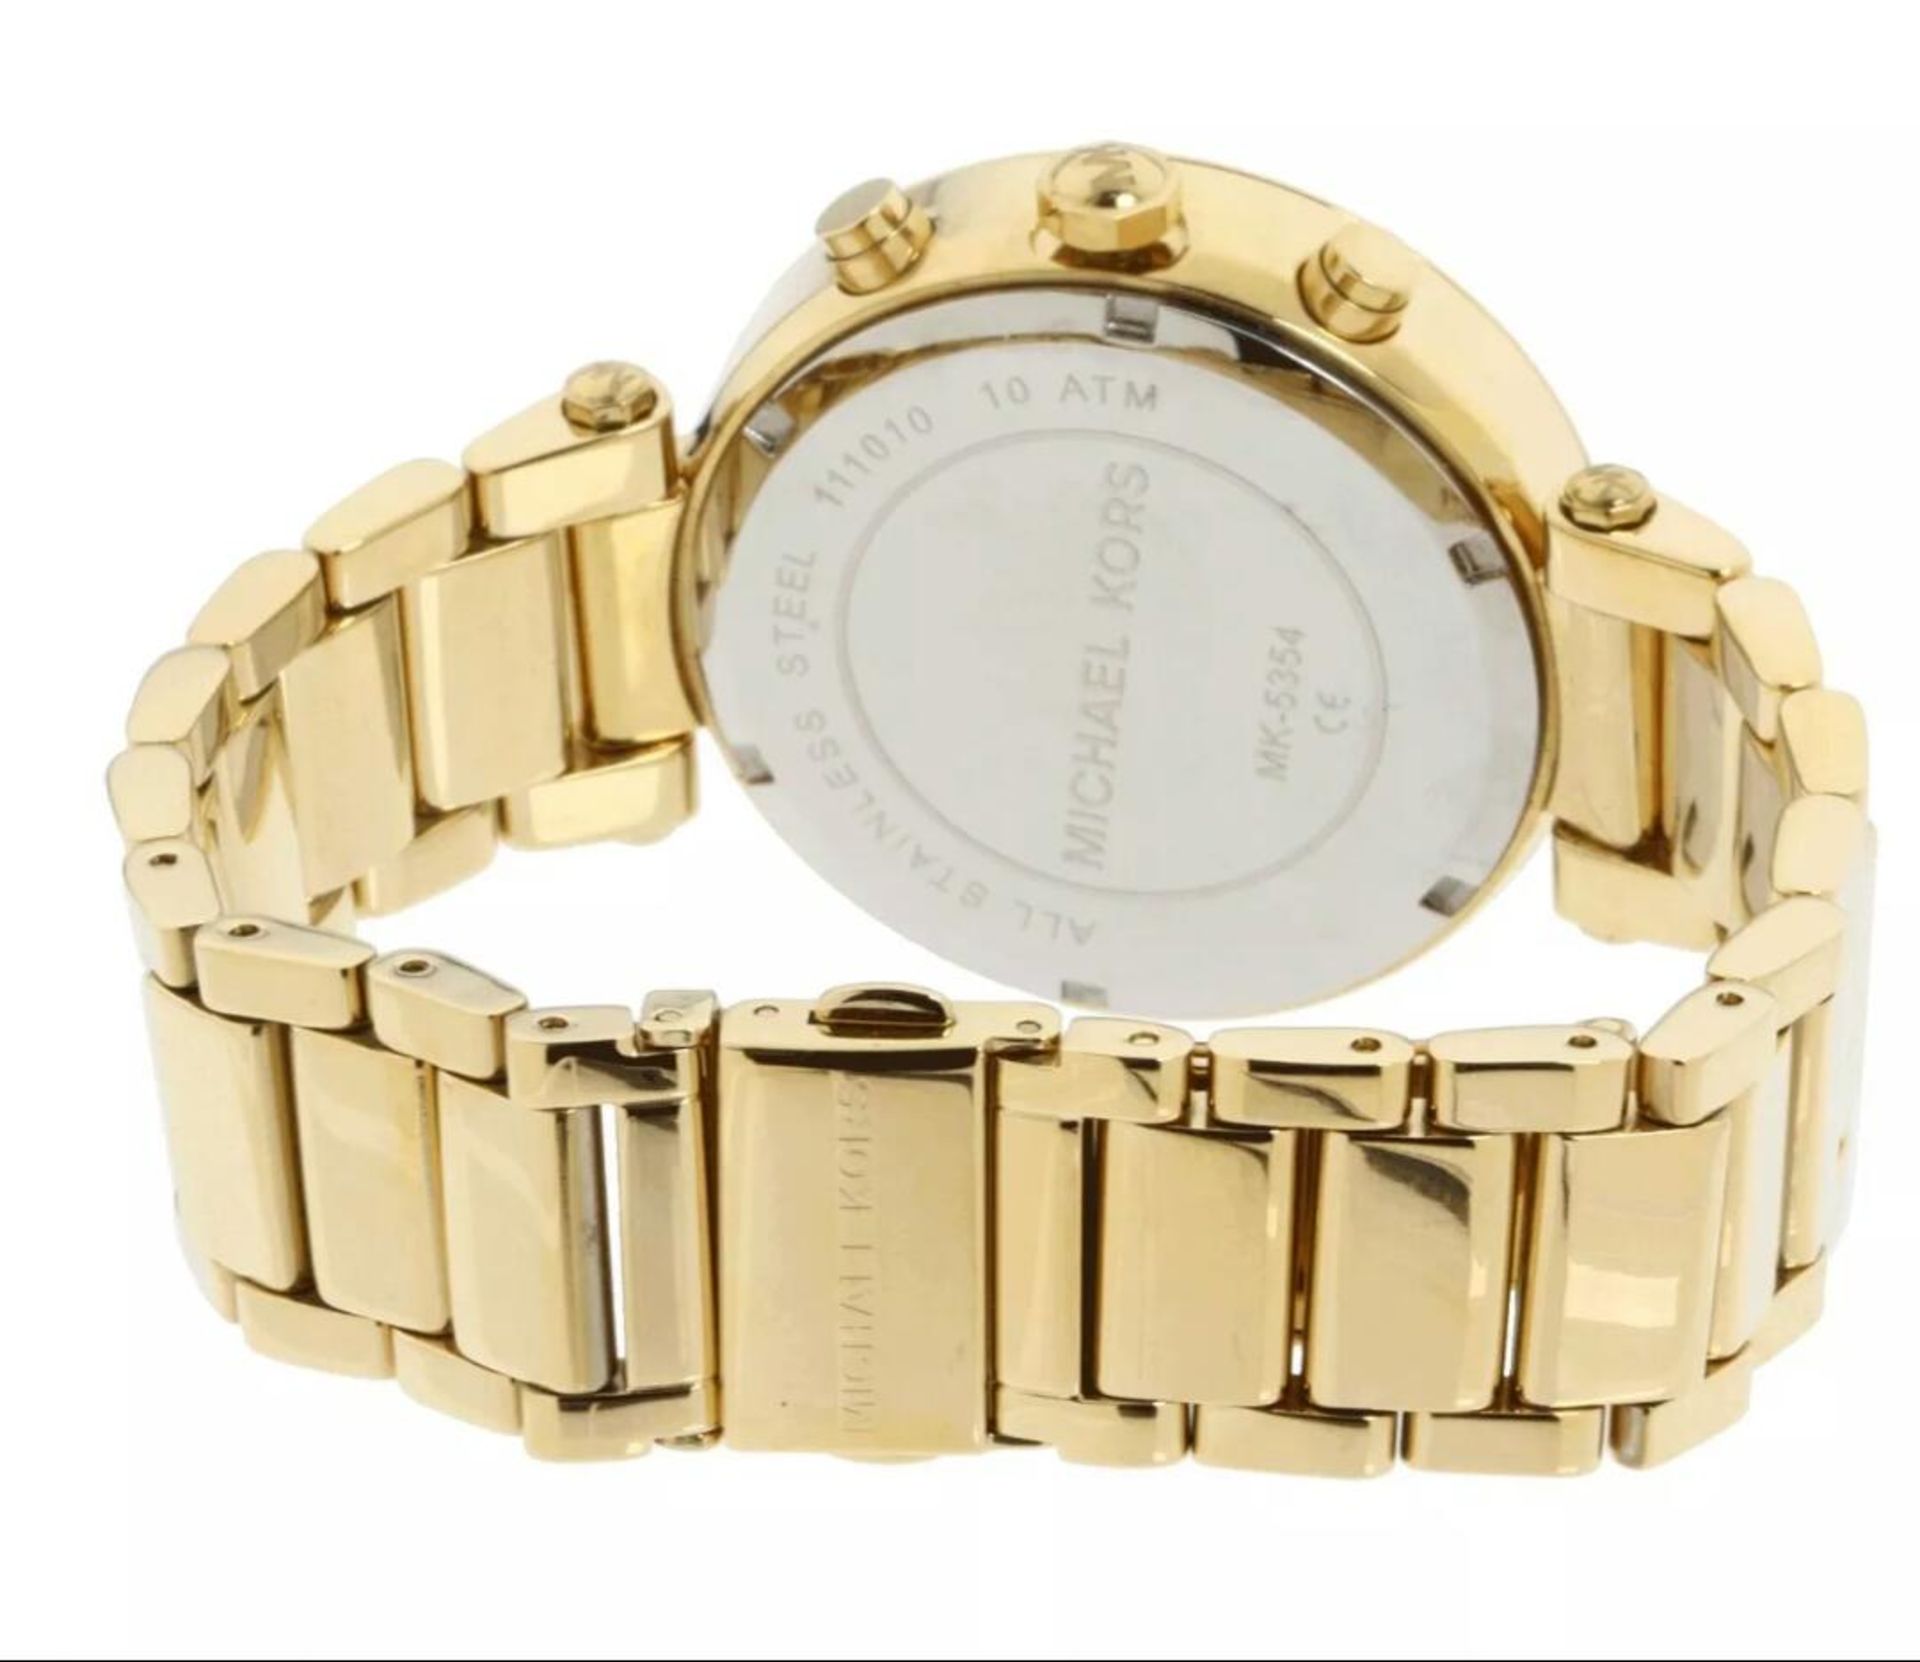 BRAND NEW LADIES MICHAEL KORS MK5354, COMPLETE WITH ORIGINAL PACKAGING AND MANUAL - Image 2 of 2